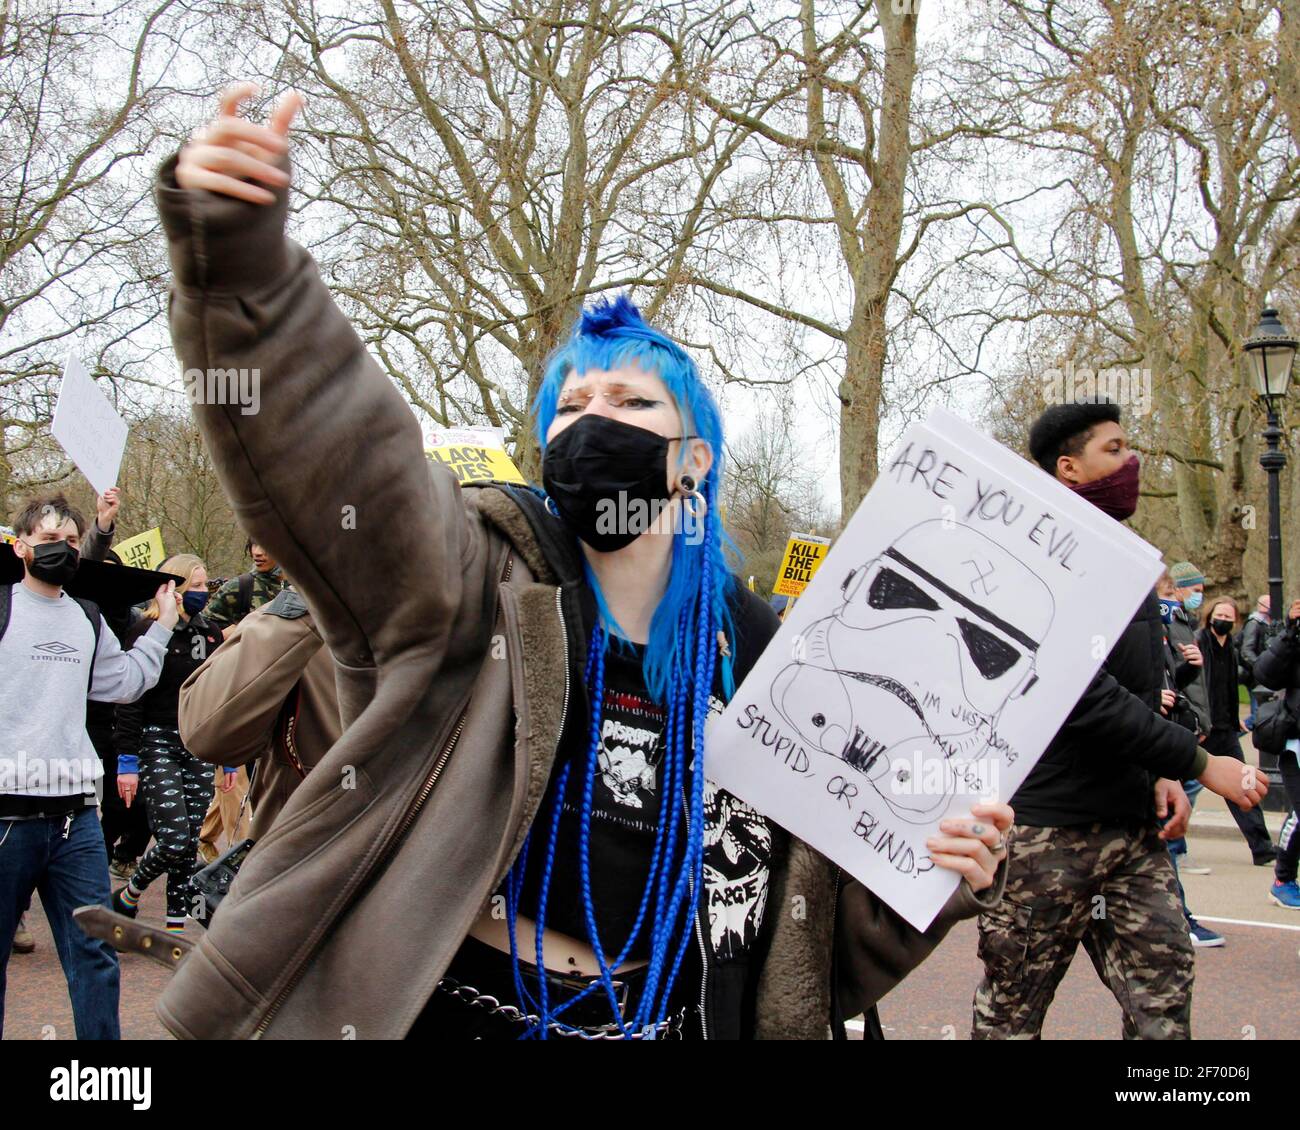 London, UK. 03rd Apr, 2021. A woman gestures and joins in a chant aimed towards the Buckingham Palace, demanding the new policing bill be dropped. London. Anna Hatfield/ Pathos Images Credit: One Up Top Editorial Images/Alamy Live News Stock Photo